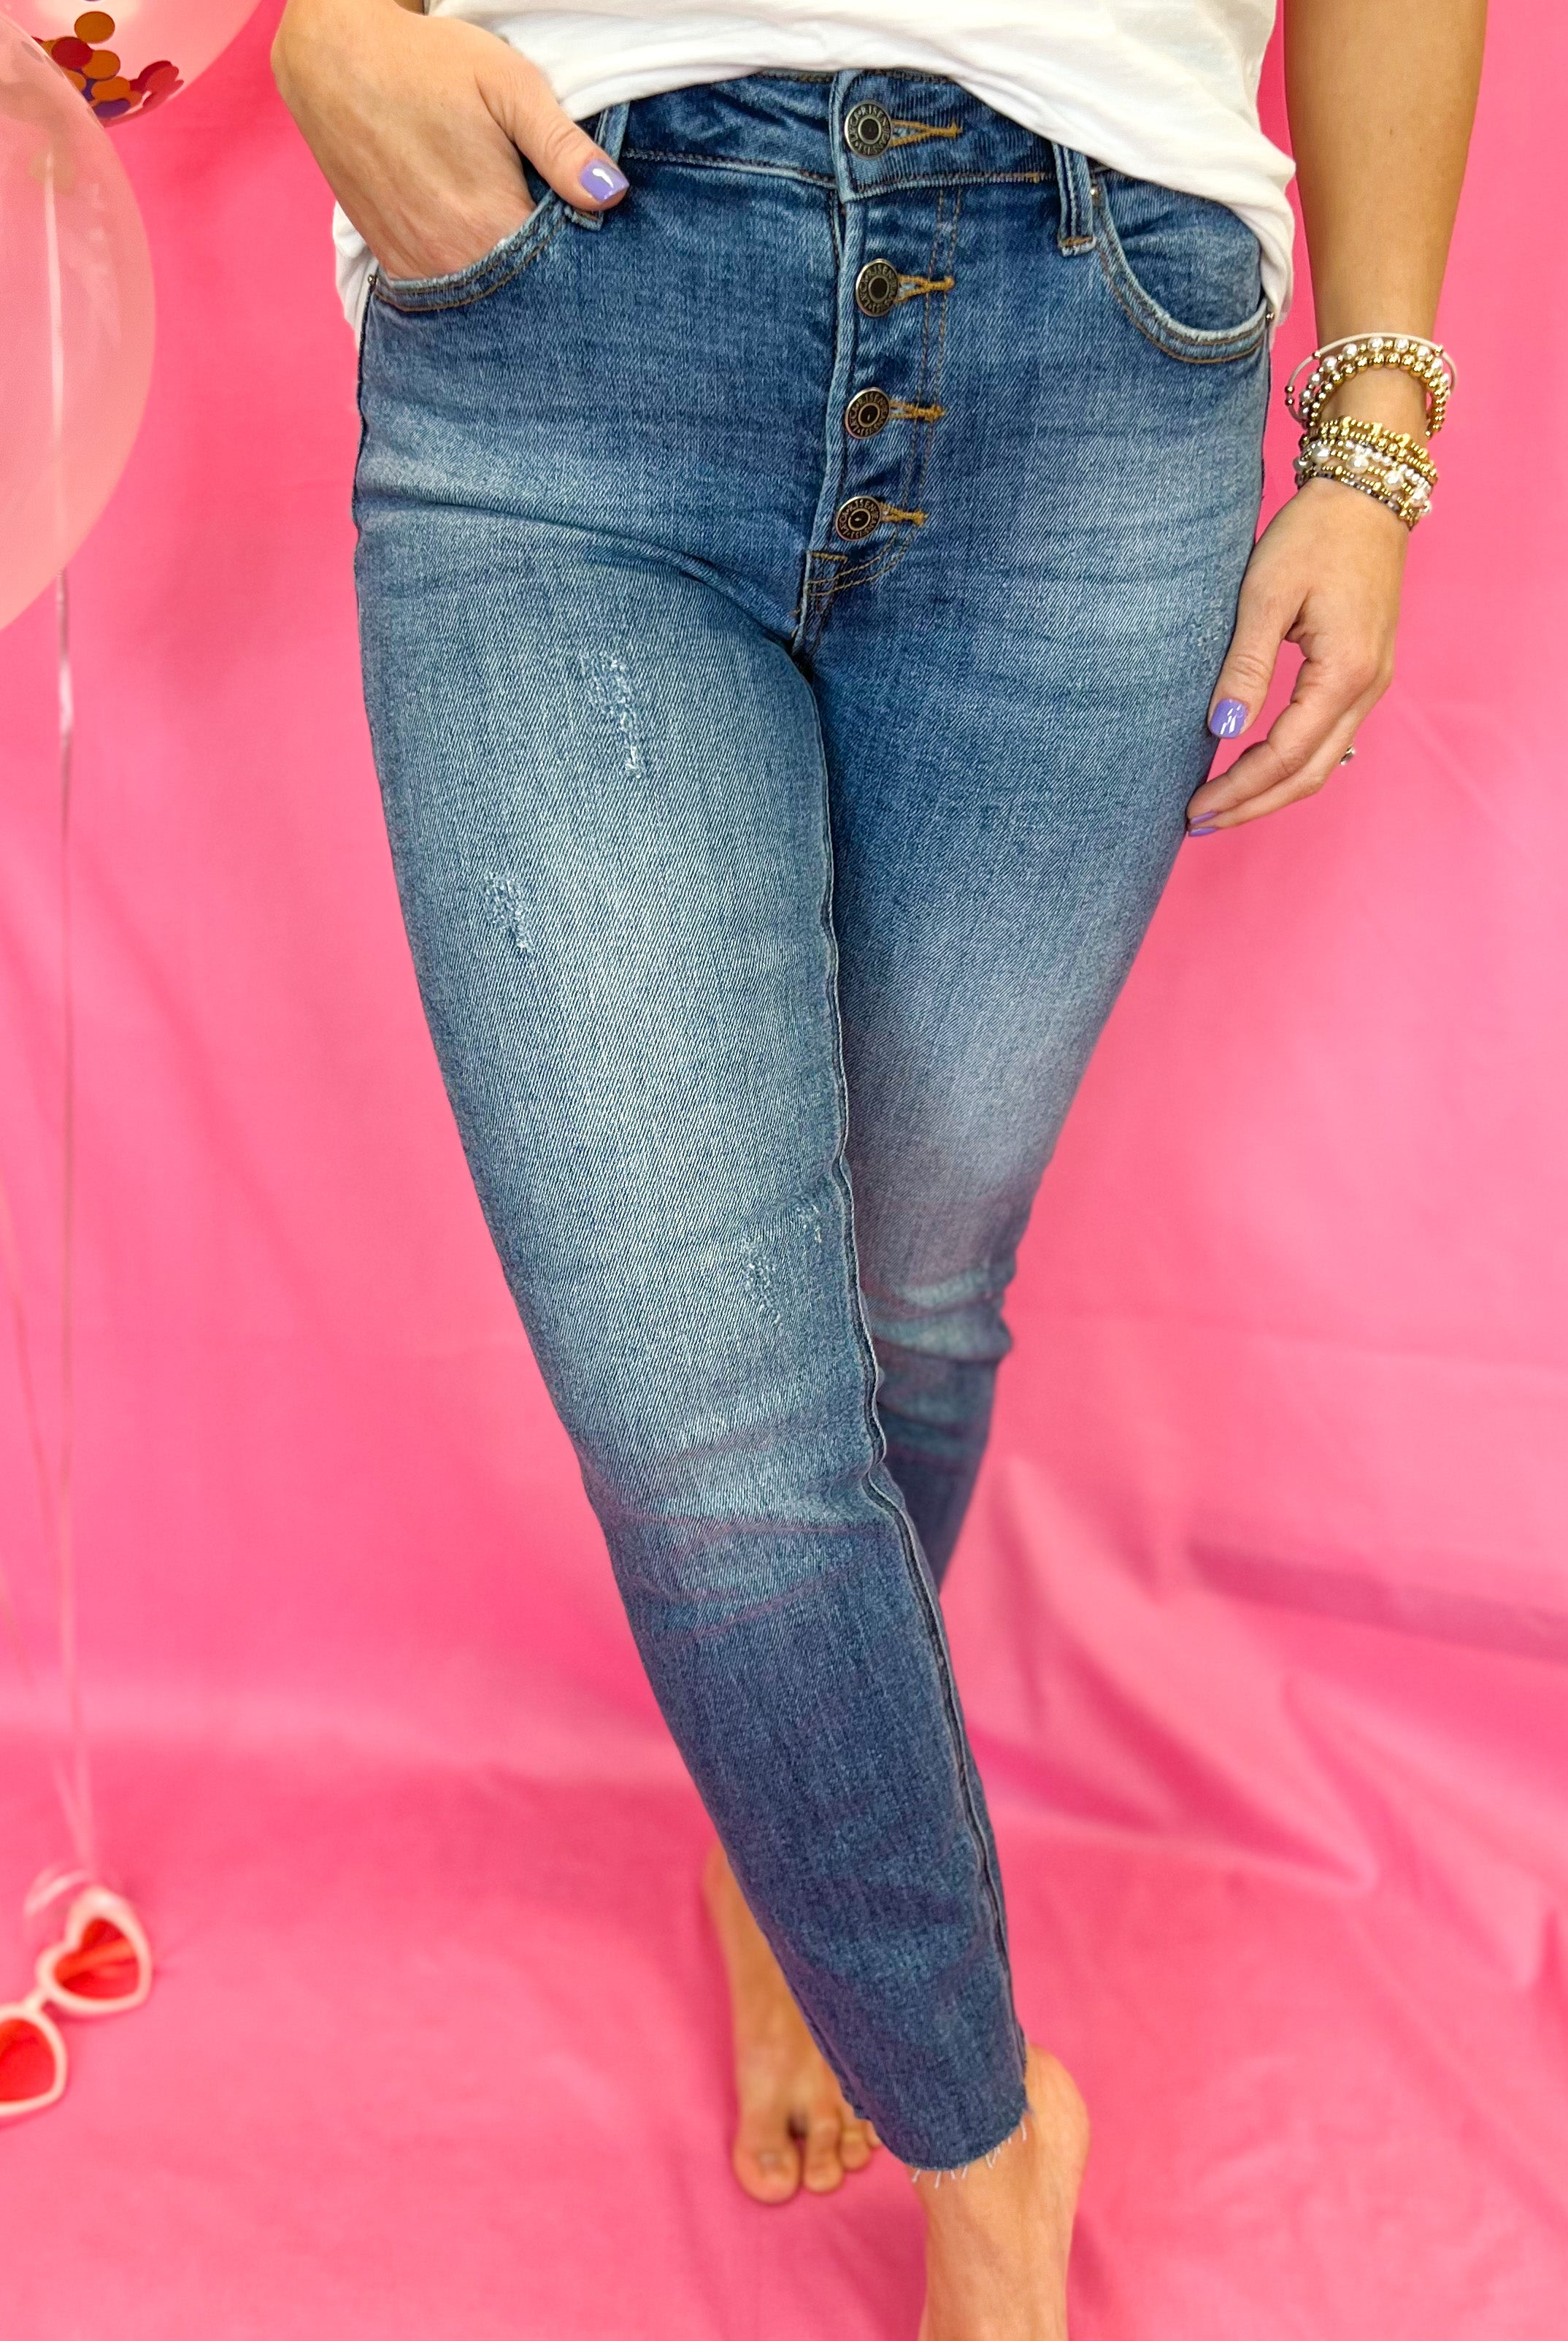 RISEN Button Fly Relaxed Fit Skinny-210 Jeans-Risen-The Lovely Closet, Women's Fashion Boutique in Alexandria, KY